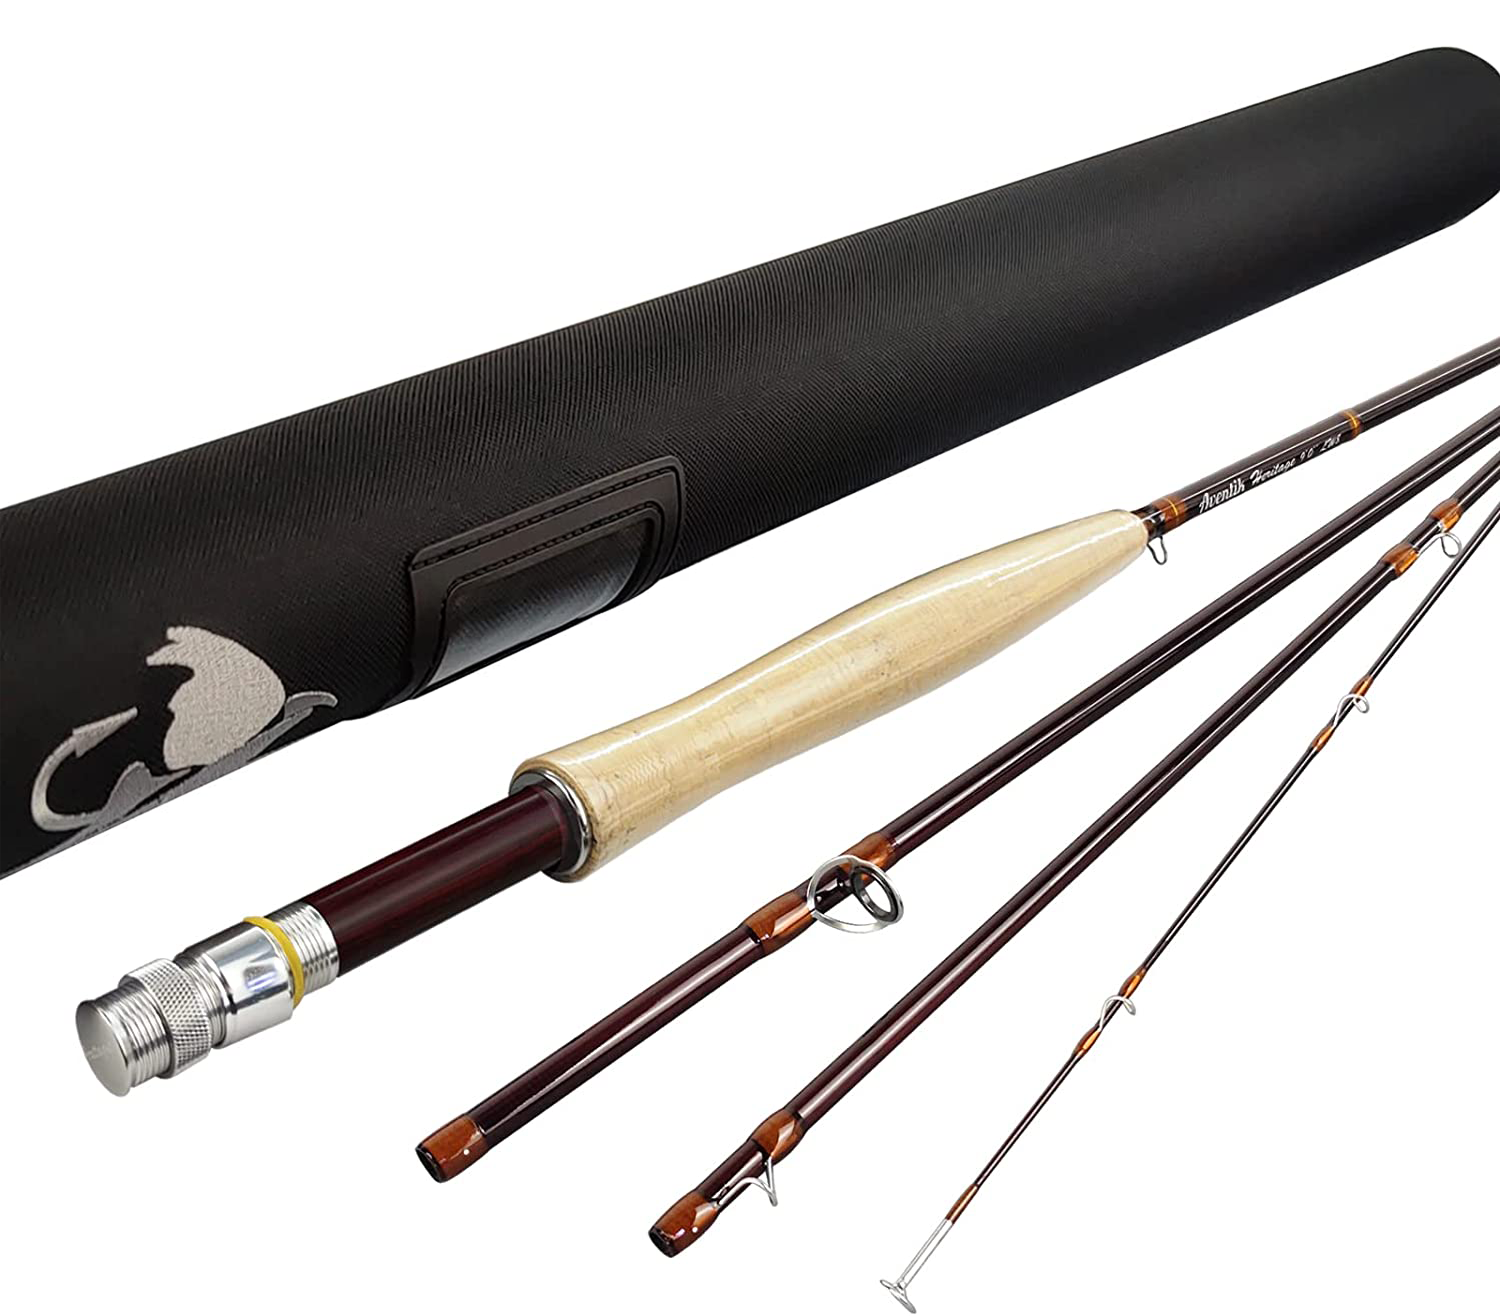 Riverruns Heritage Series Fly Fishing Rod - 4 Pieces 9FT IM8 Carbon Blank  Classic Forgiving Medium Fast Action Fly Rod with Burgundy Finish and